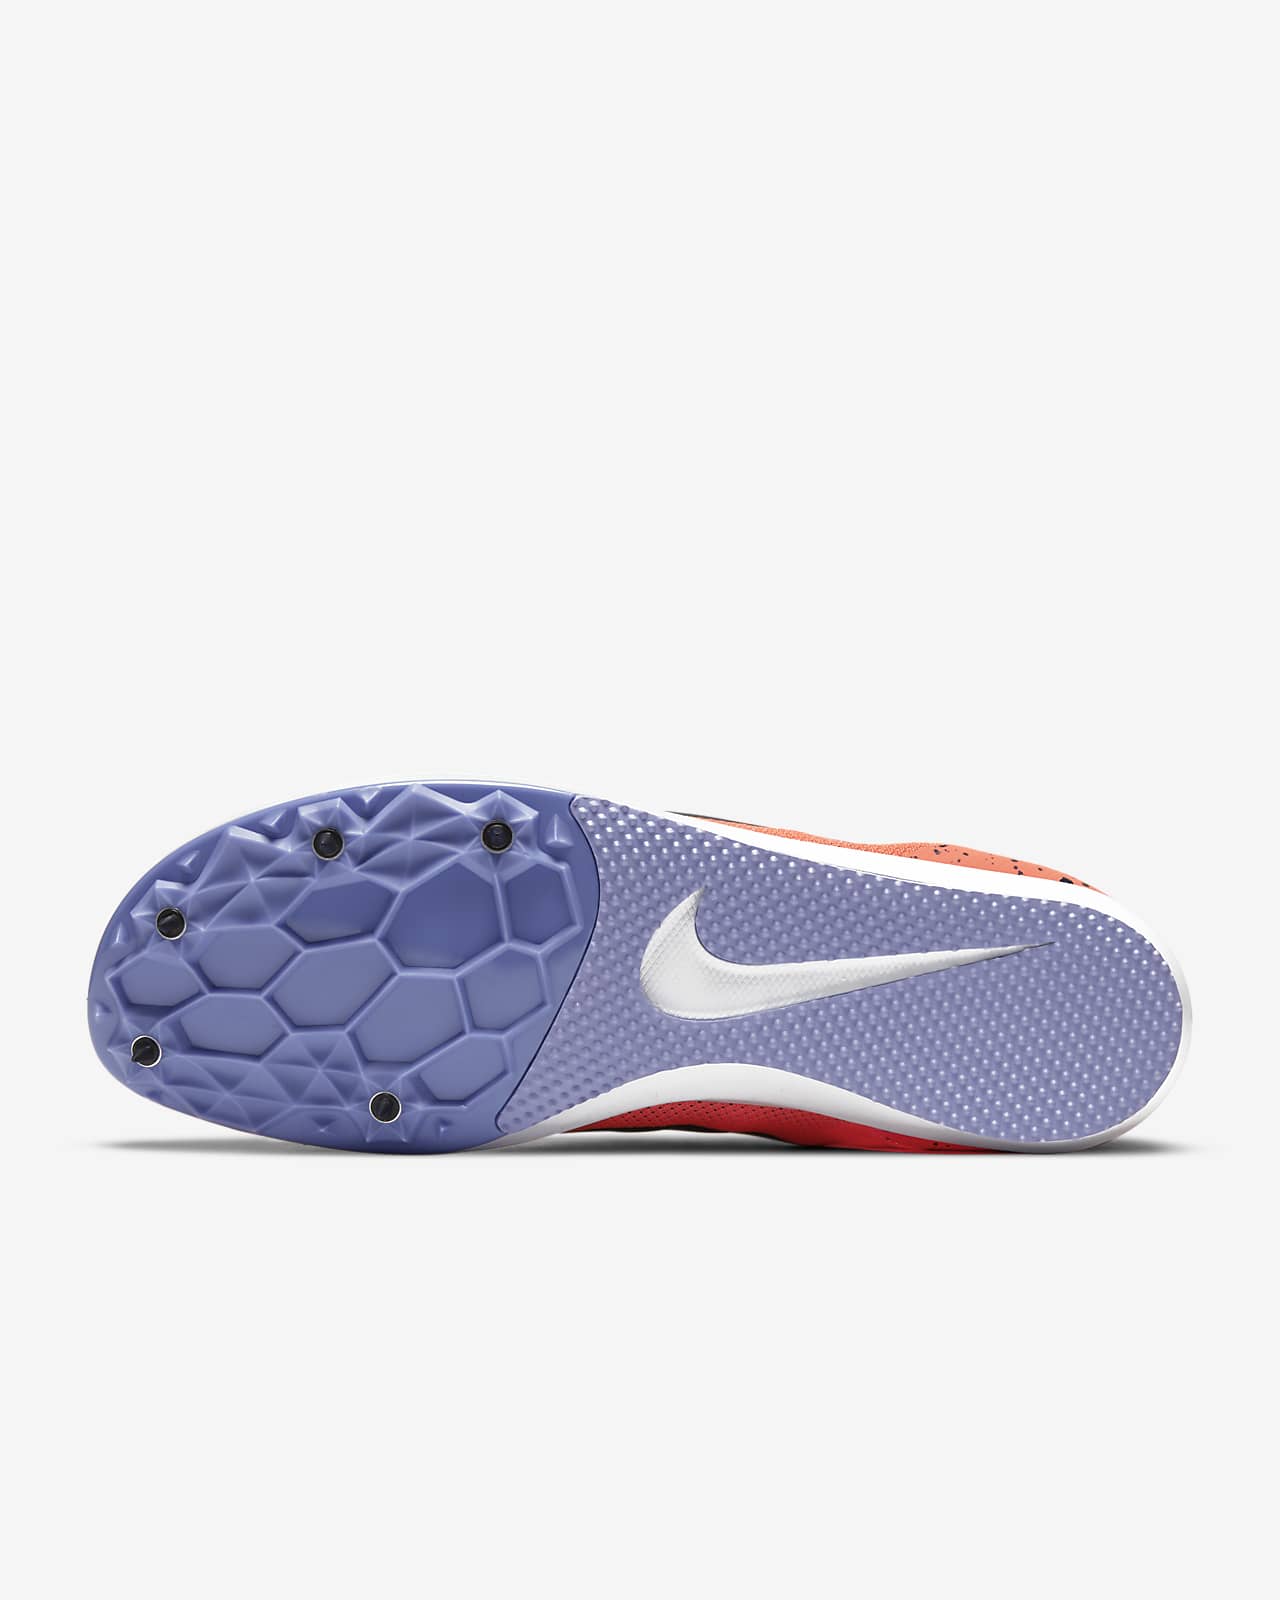 nike rival d distance